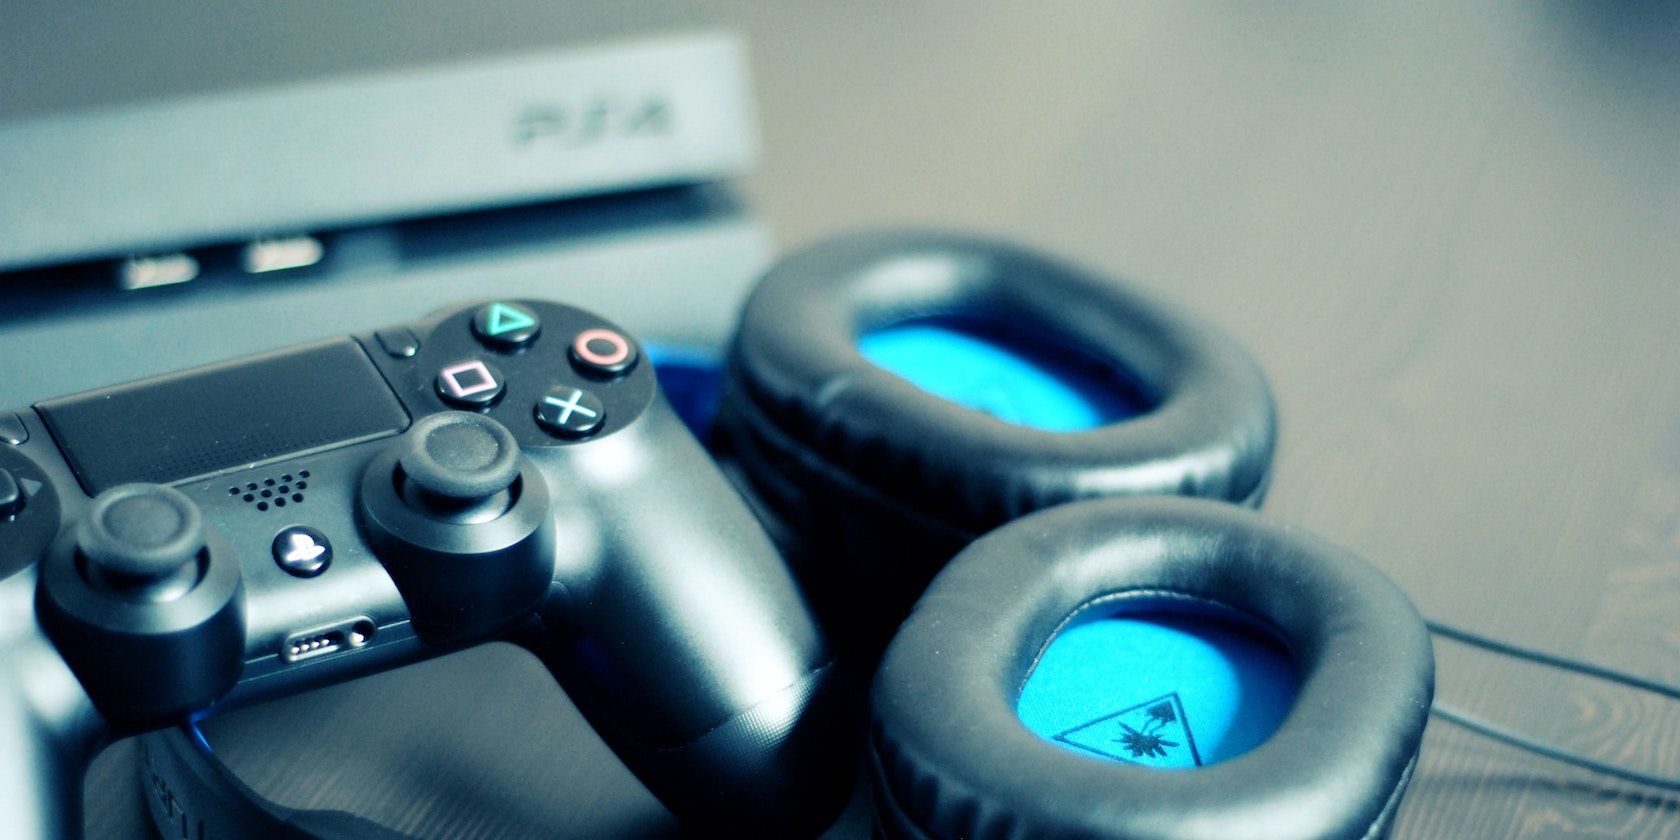 A PS4 with a controller and blue headphones